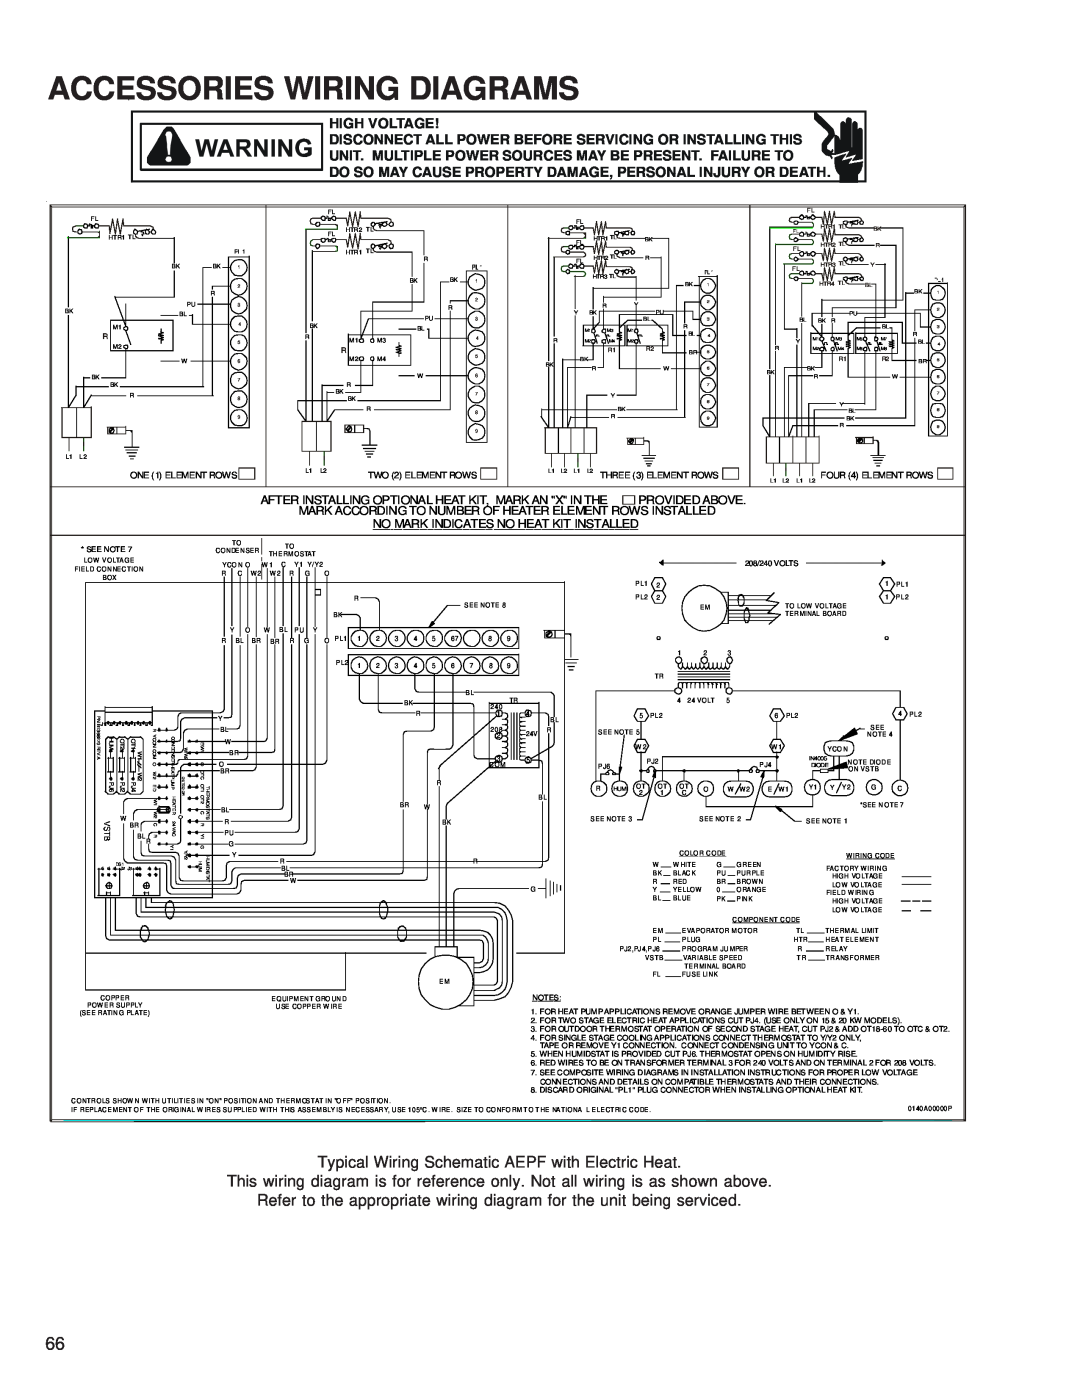 Goodman Mfg RT6100004R13 manual Accessories Wiring Diagrams, Typical Wiring Schematic AEPF with Electric Heat 